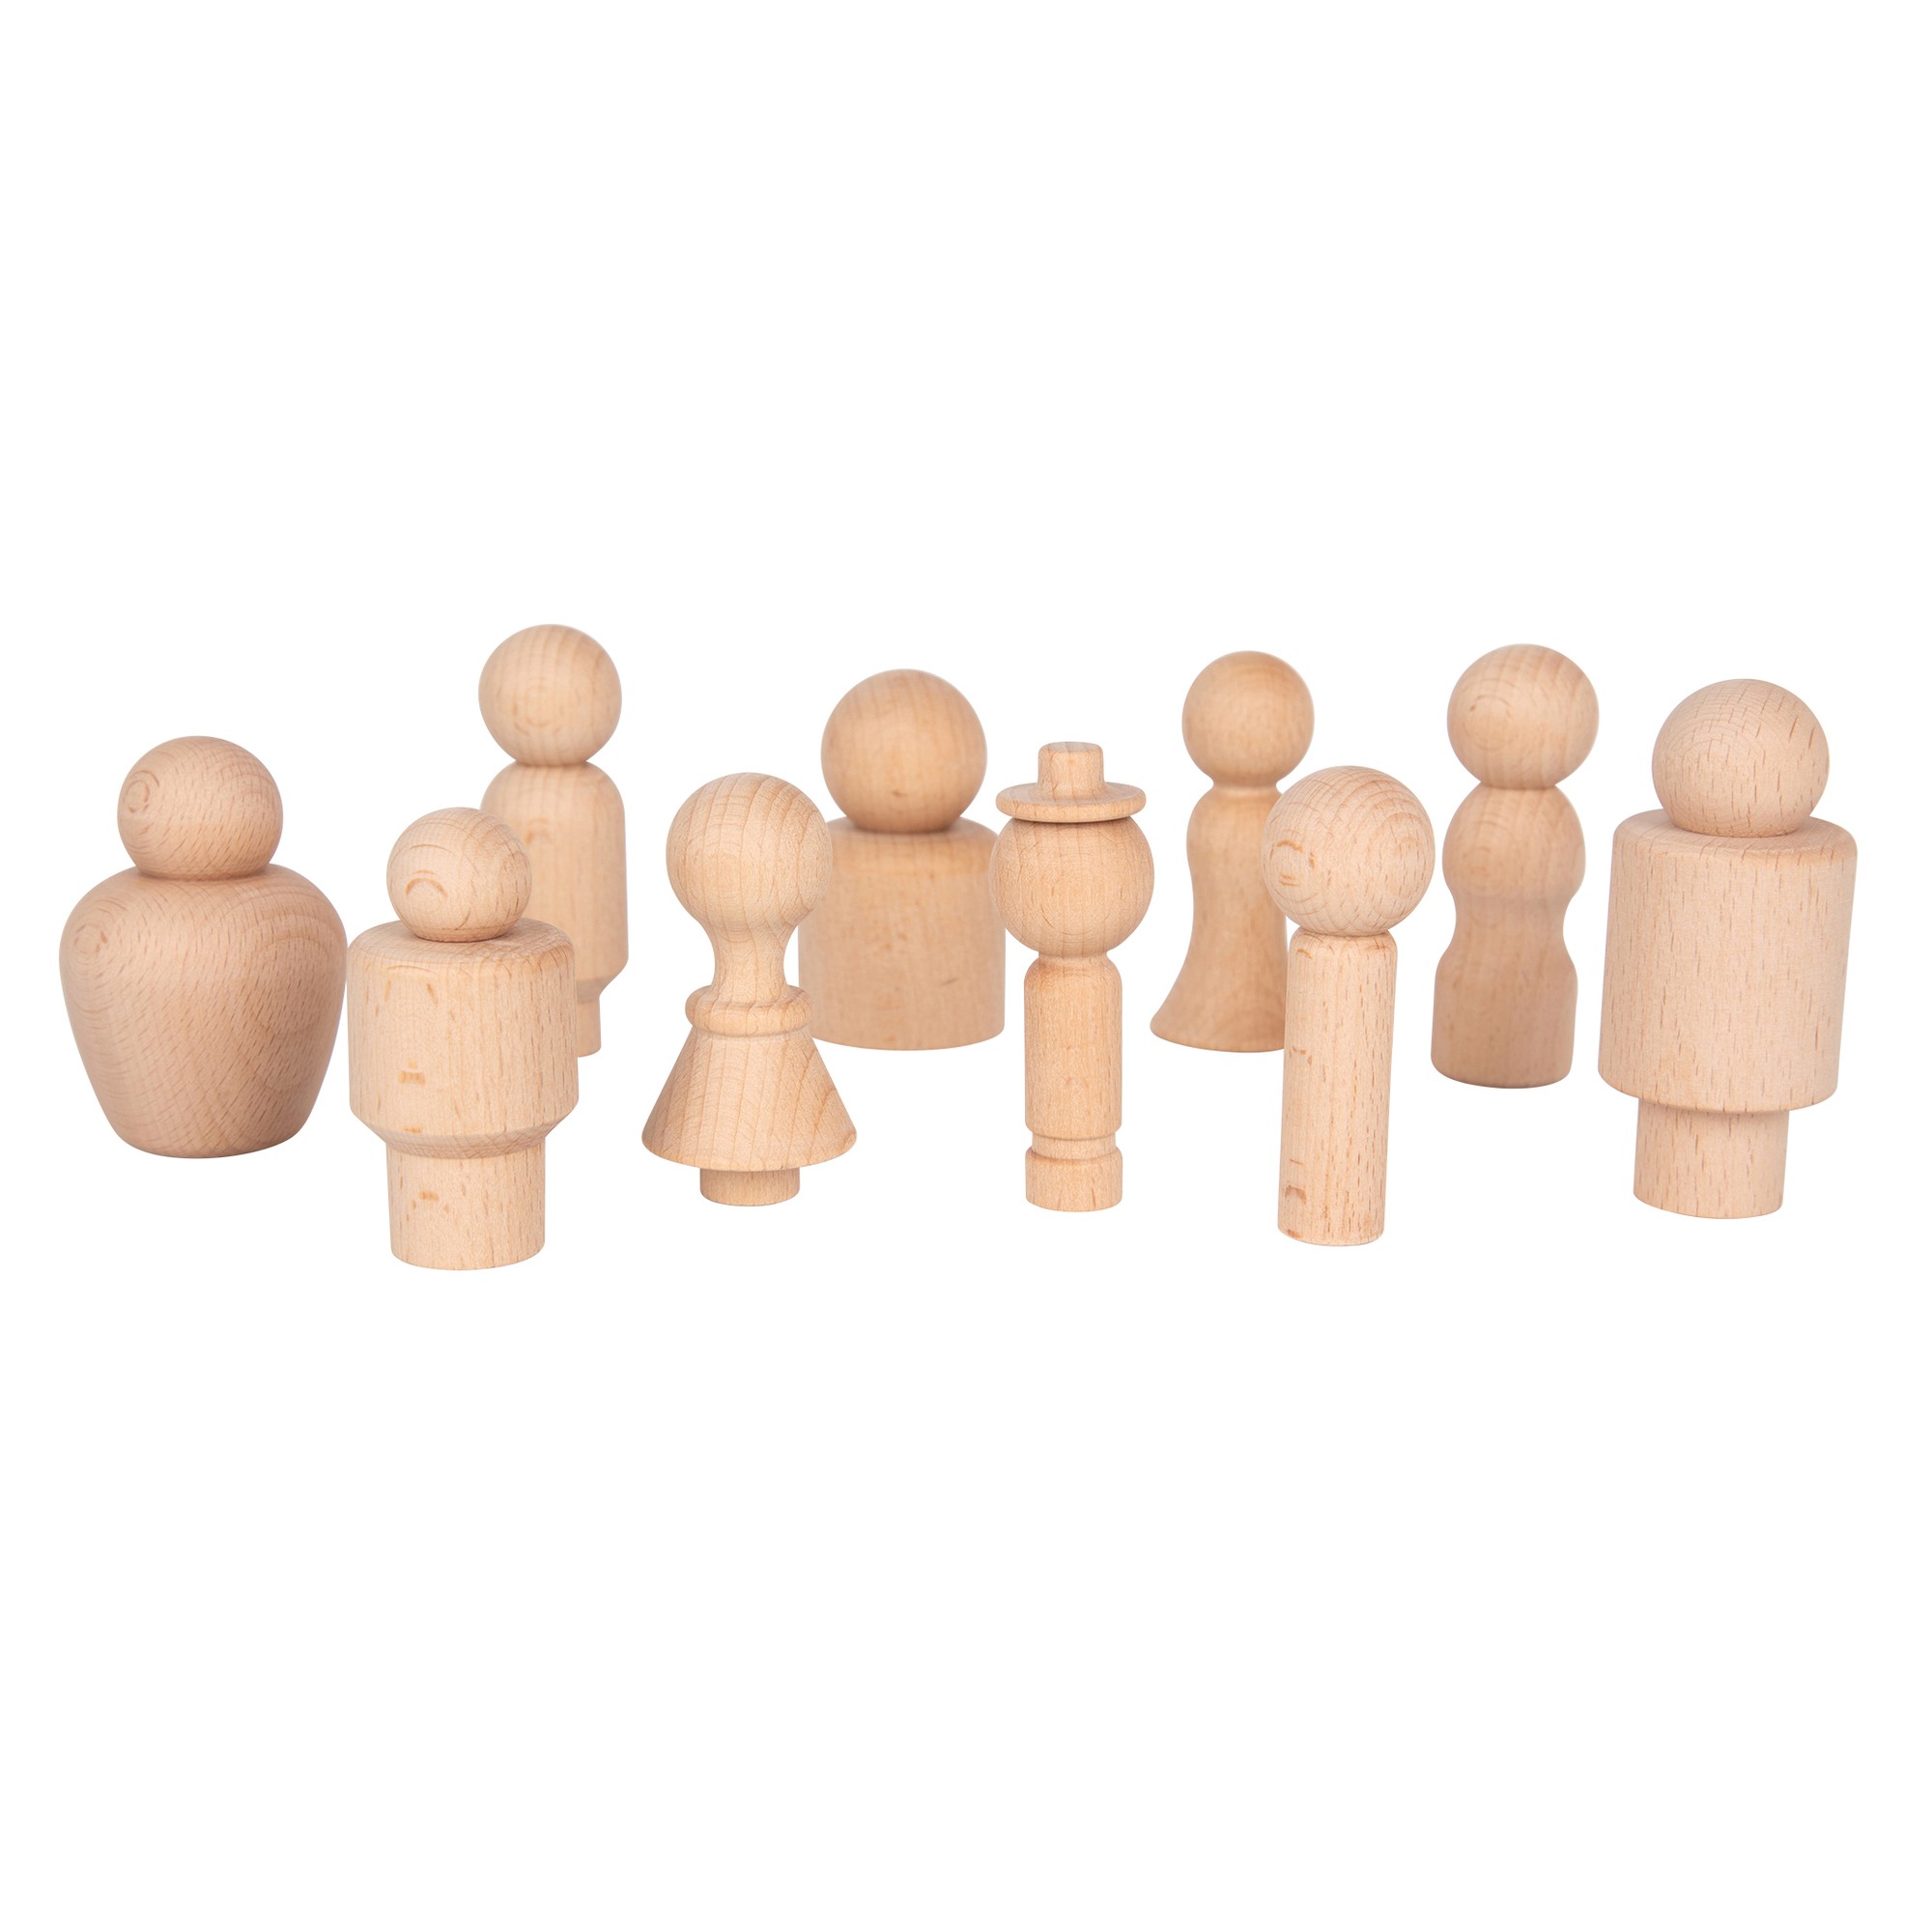 Wooden Community Figures - Set of 10 - For Ages 18m+ - Wooden Peg Dolls for Kids - 10 Different Shapes - Loose Parts Wooden Toys